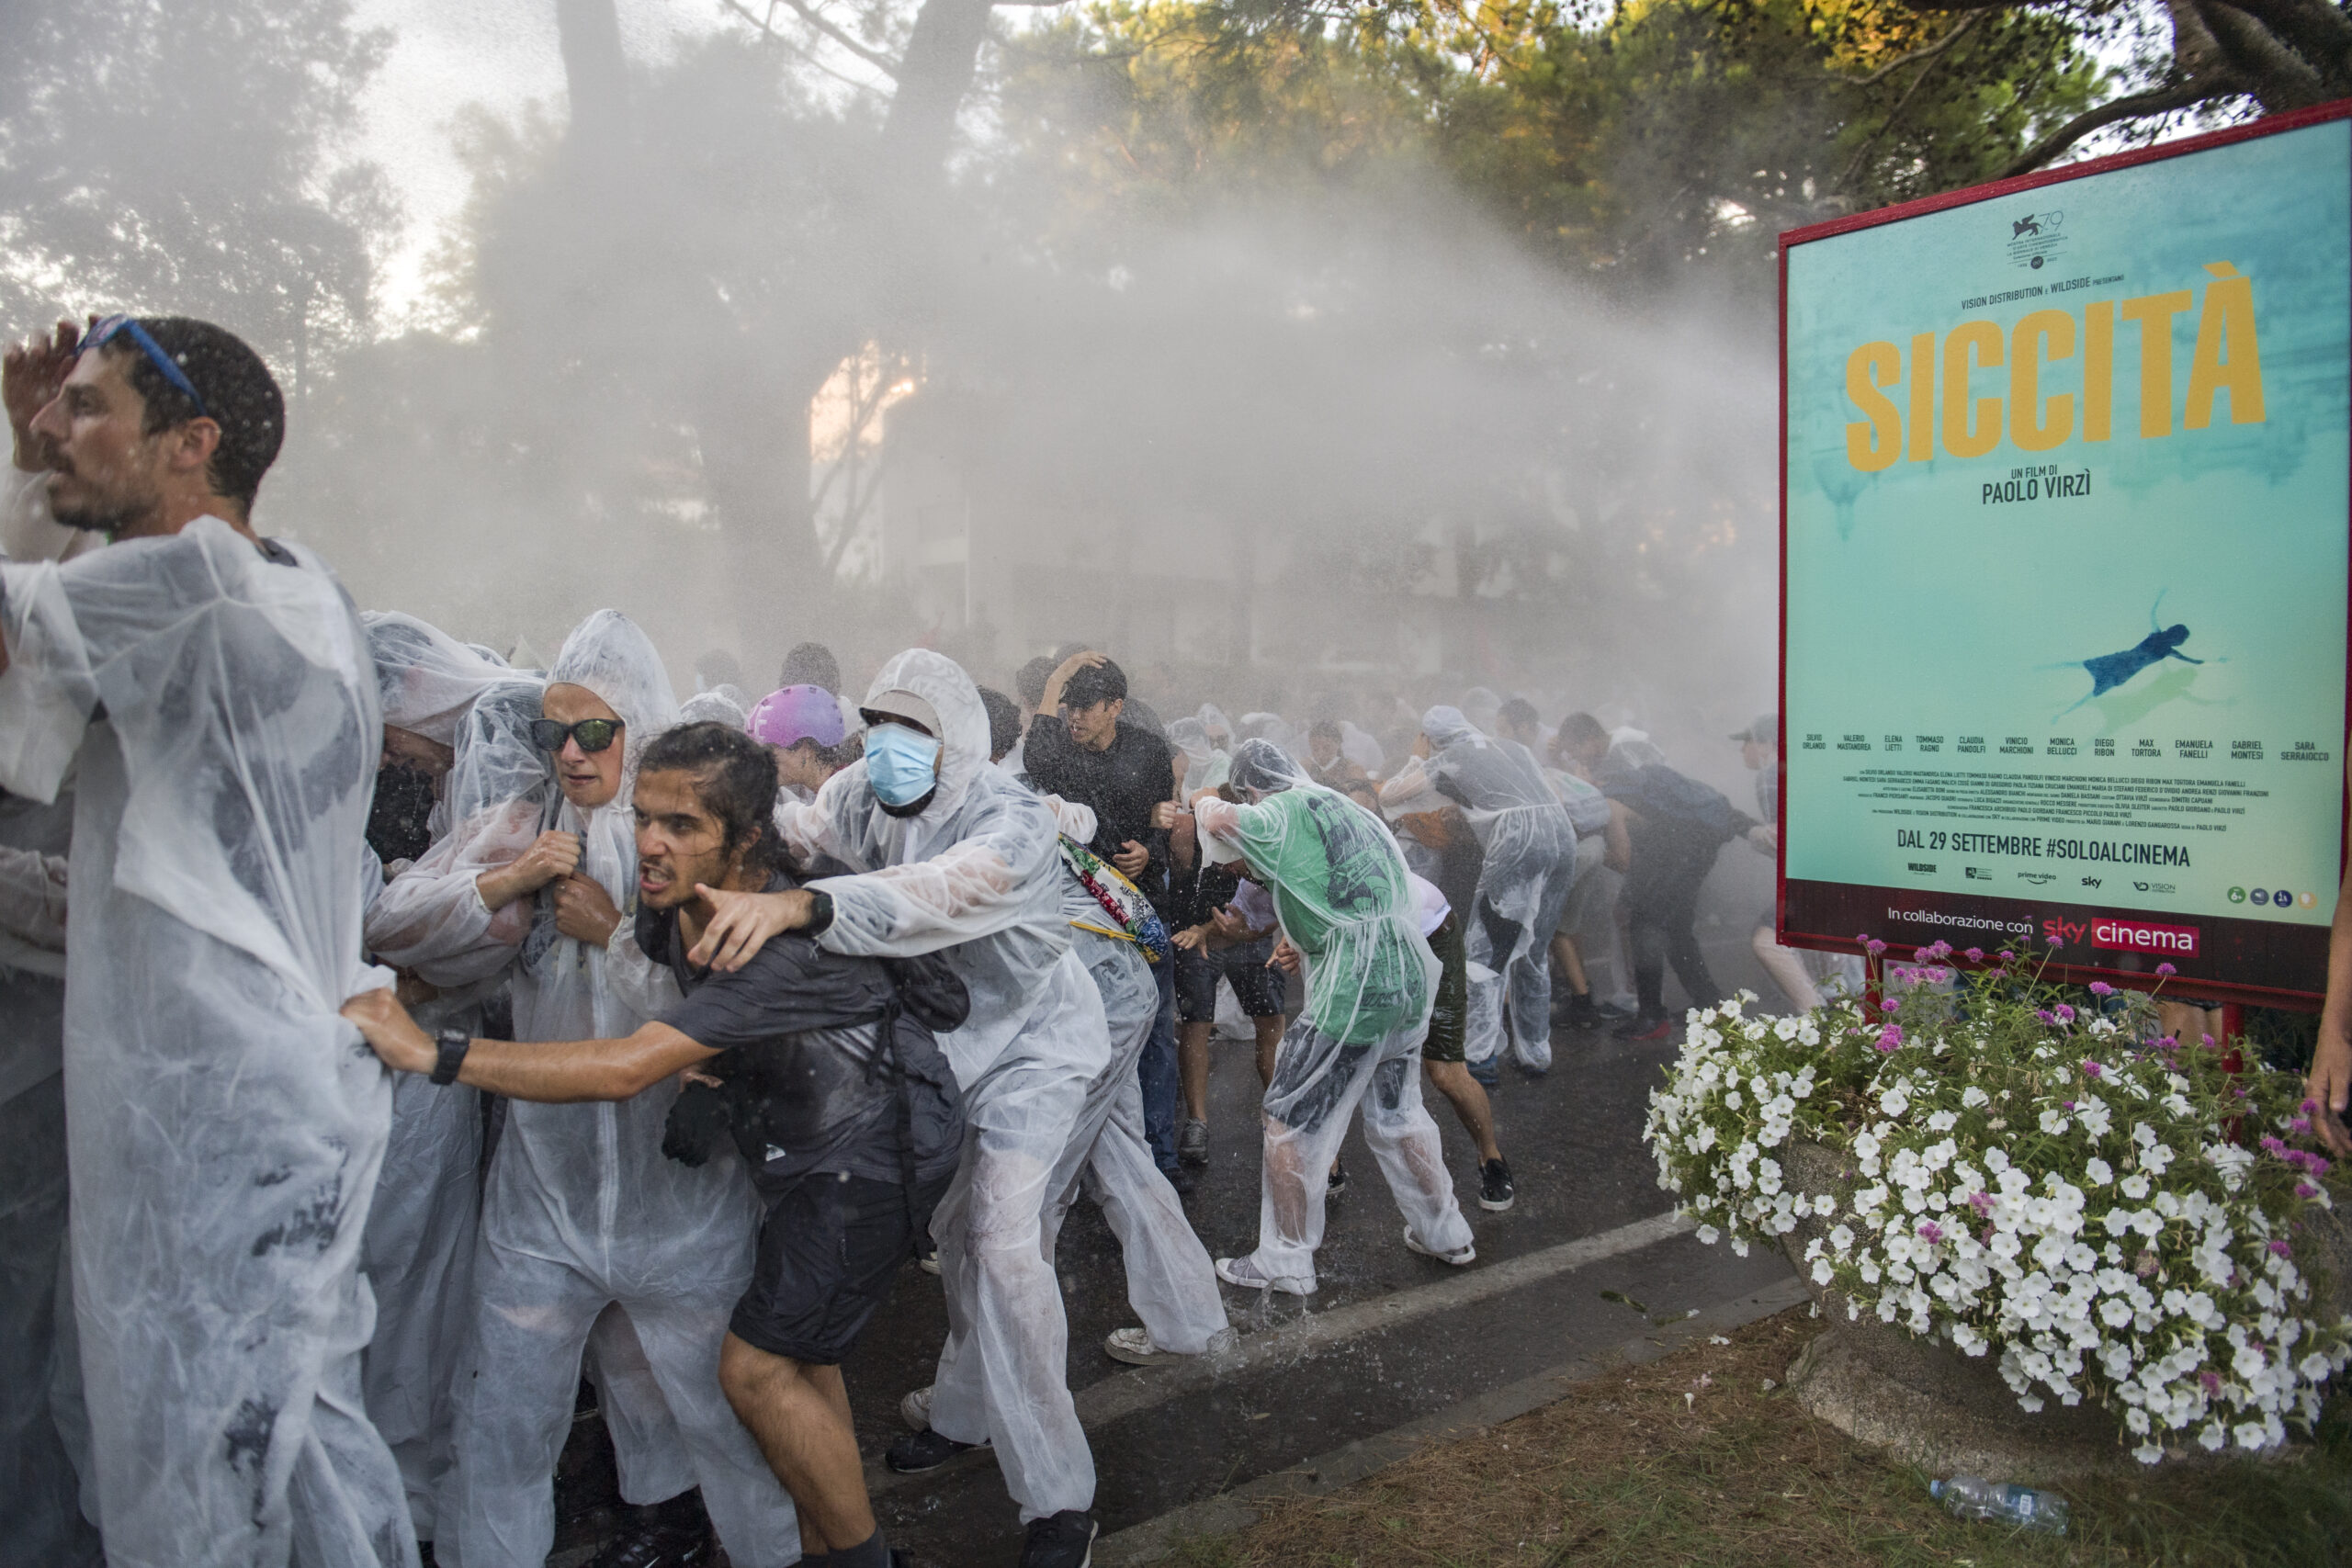 From overlapping to convergence: workers’ struggles and climate justice from GKN, Florence